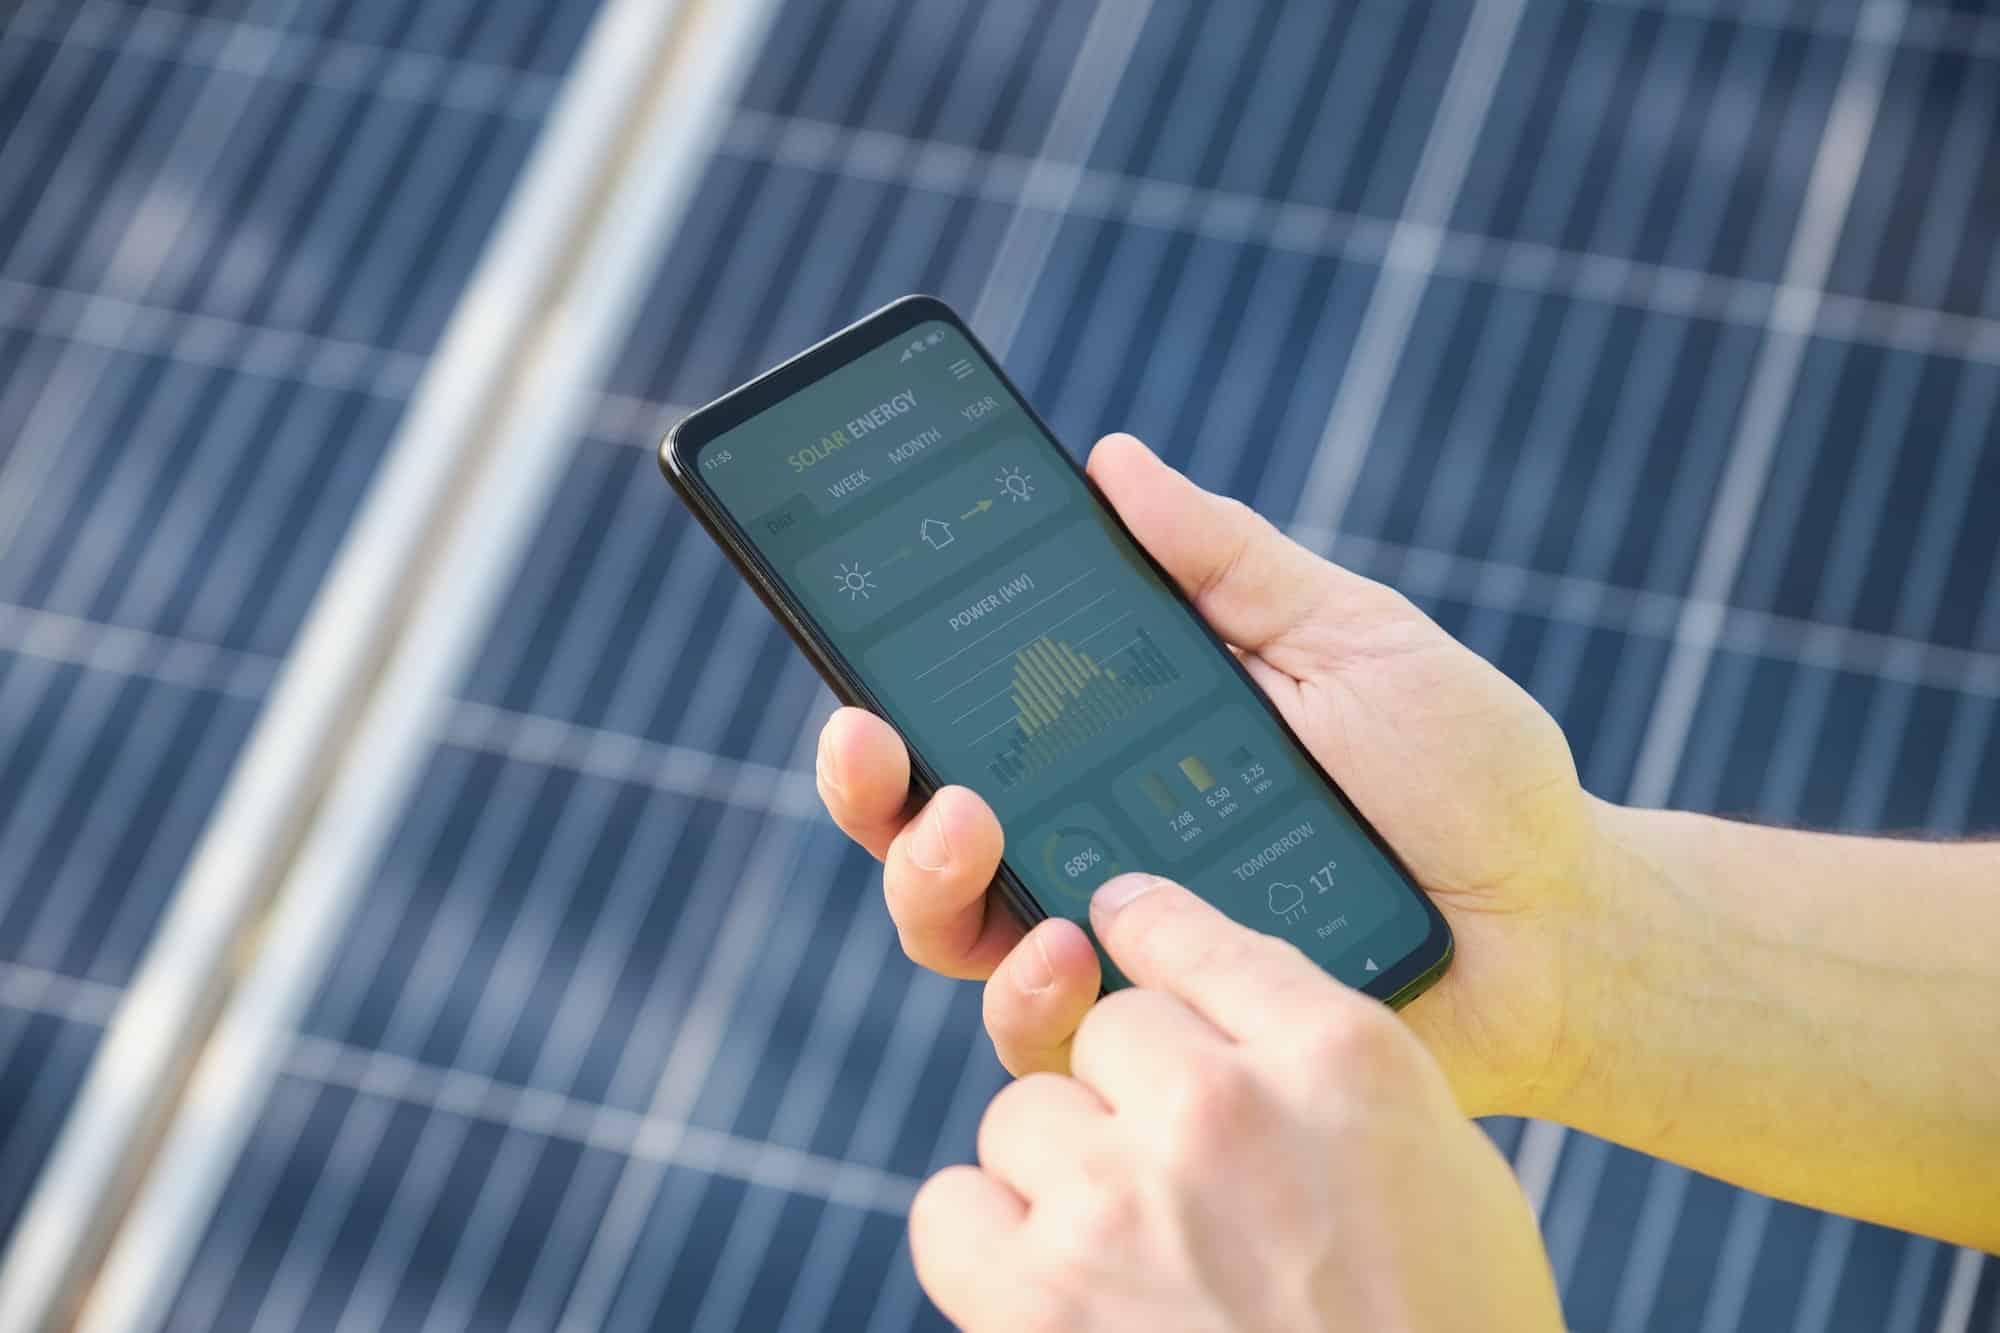 Hands checking solar power generation in a smartphone app.